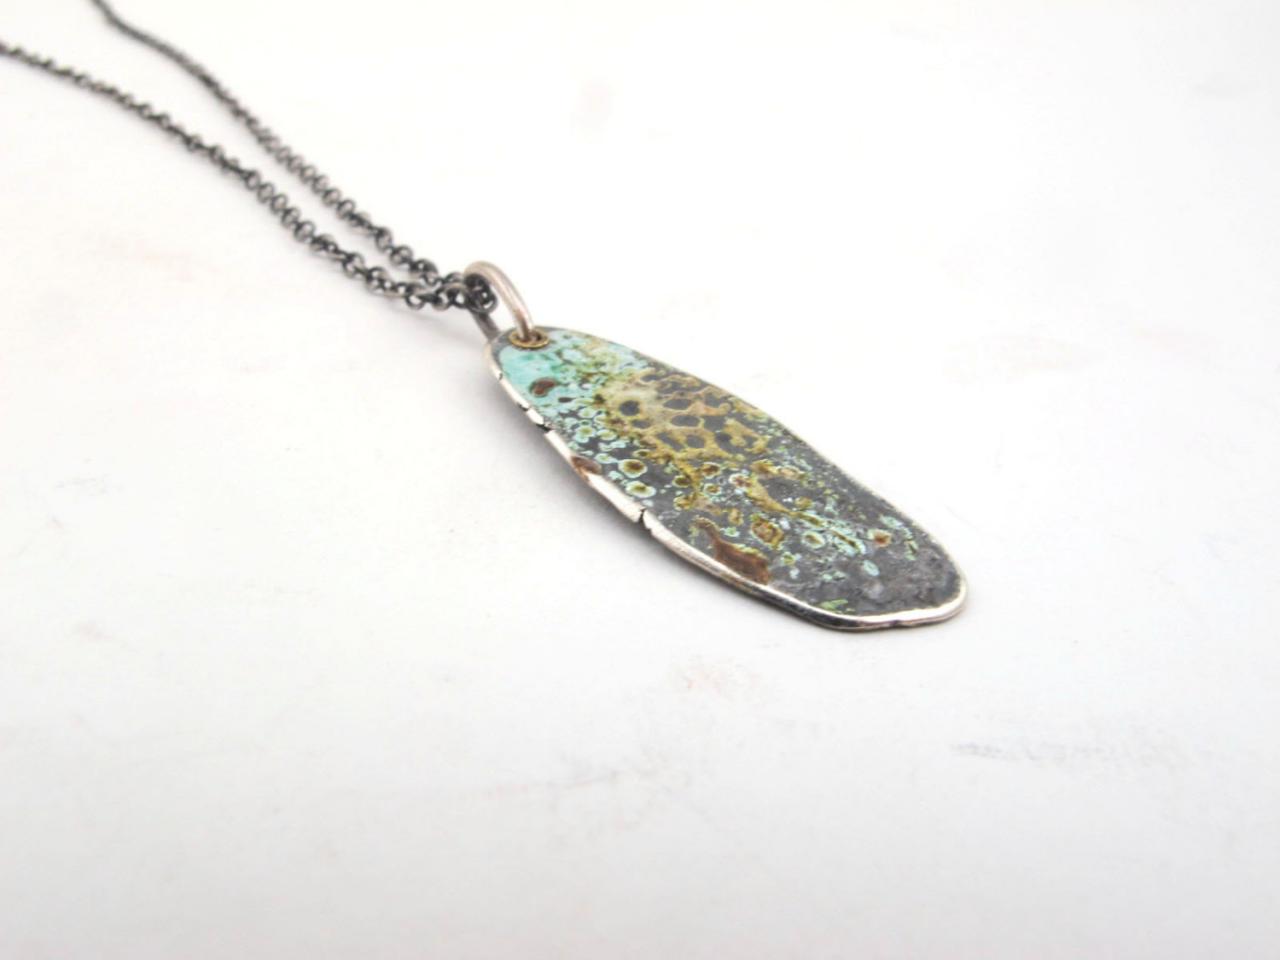 Mossy Pendant- Sterling Silver And Enamel Tag Pendant.